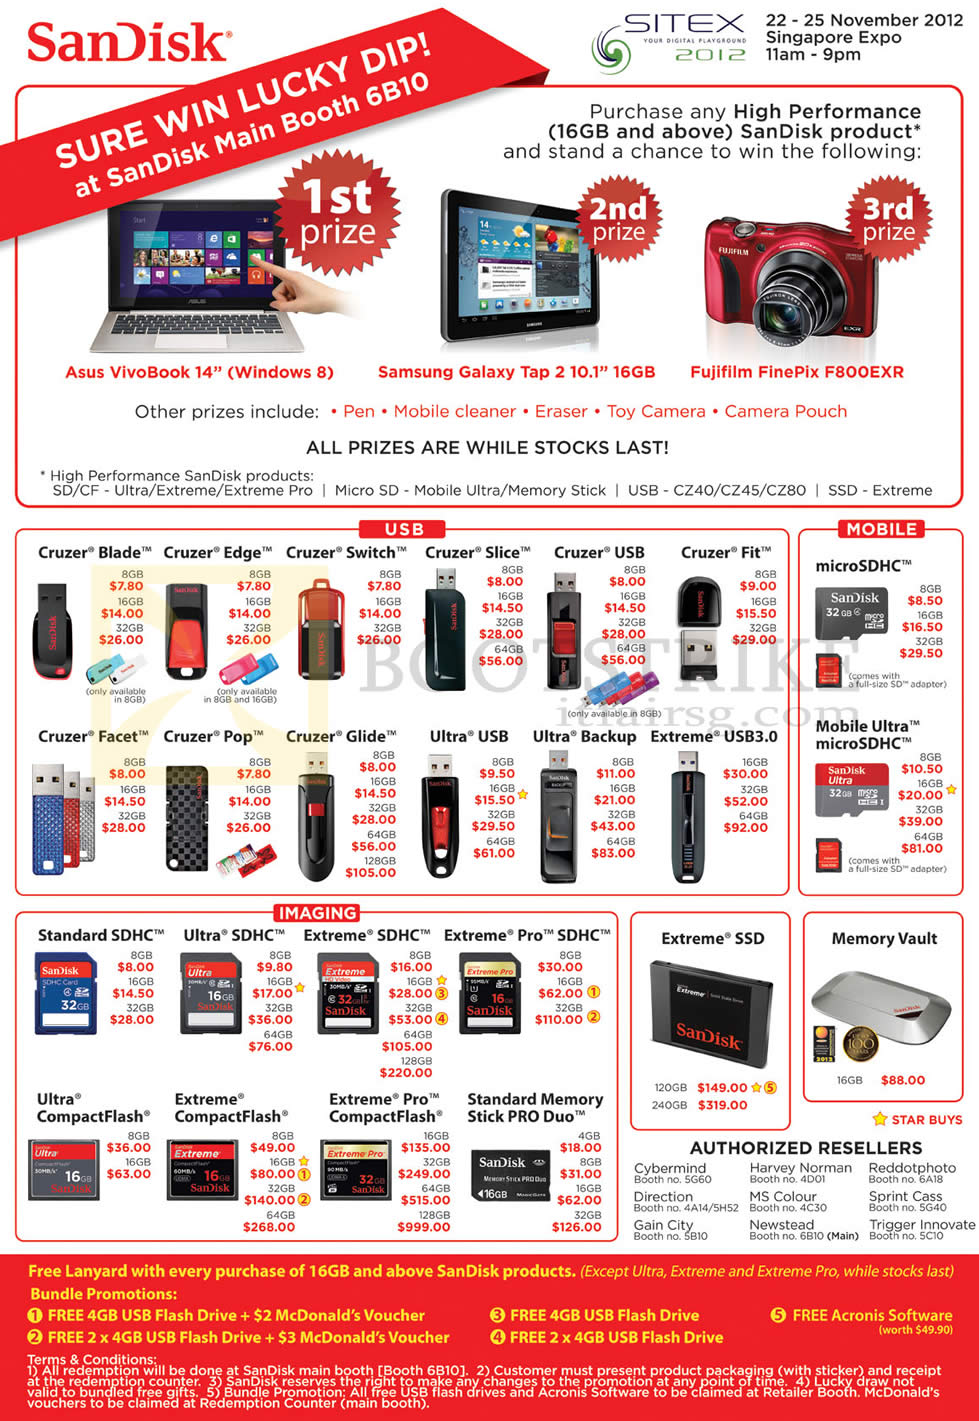 SITEX 2012 price list image brochure of Sandisk USB Flash Memory Cards, Cruzer Blade Edge Switch Slice Fit Facet Pop Glide Backup Extreme, MicroSDHC, CompactFlash CF, Memory Stick Pro Duo, SSD, Memory Vault